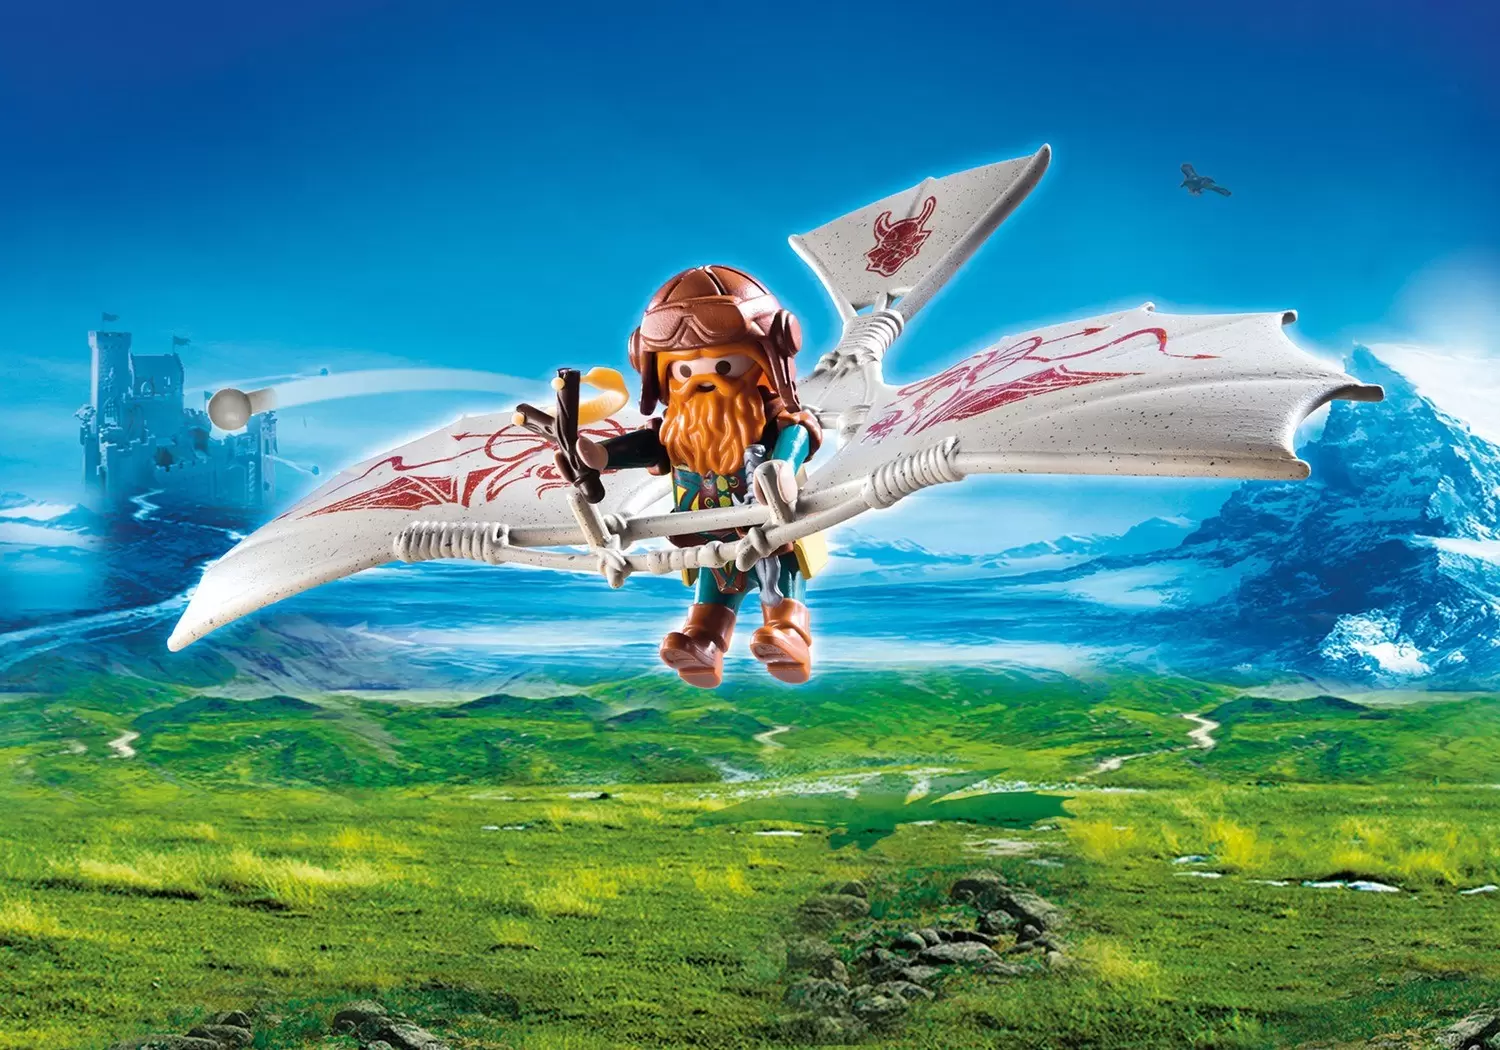 Playmobil Middle-Ages - Dwarf Flying Machine